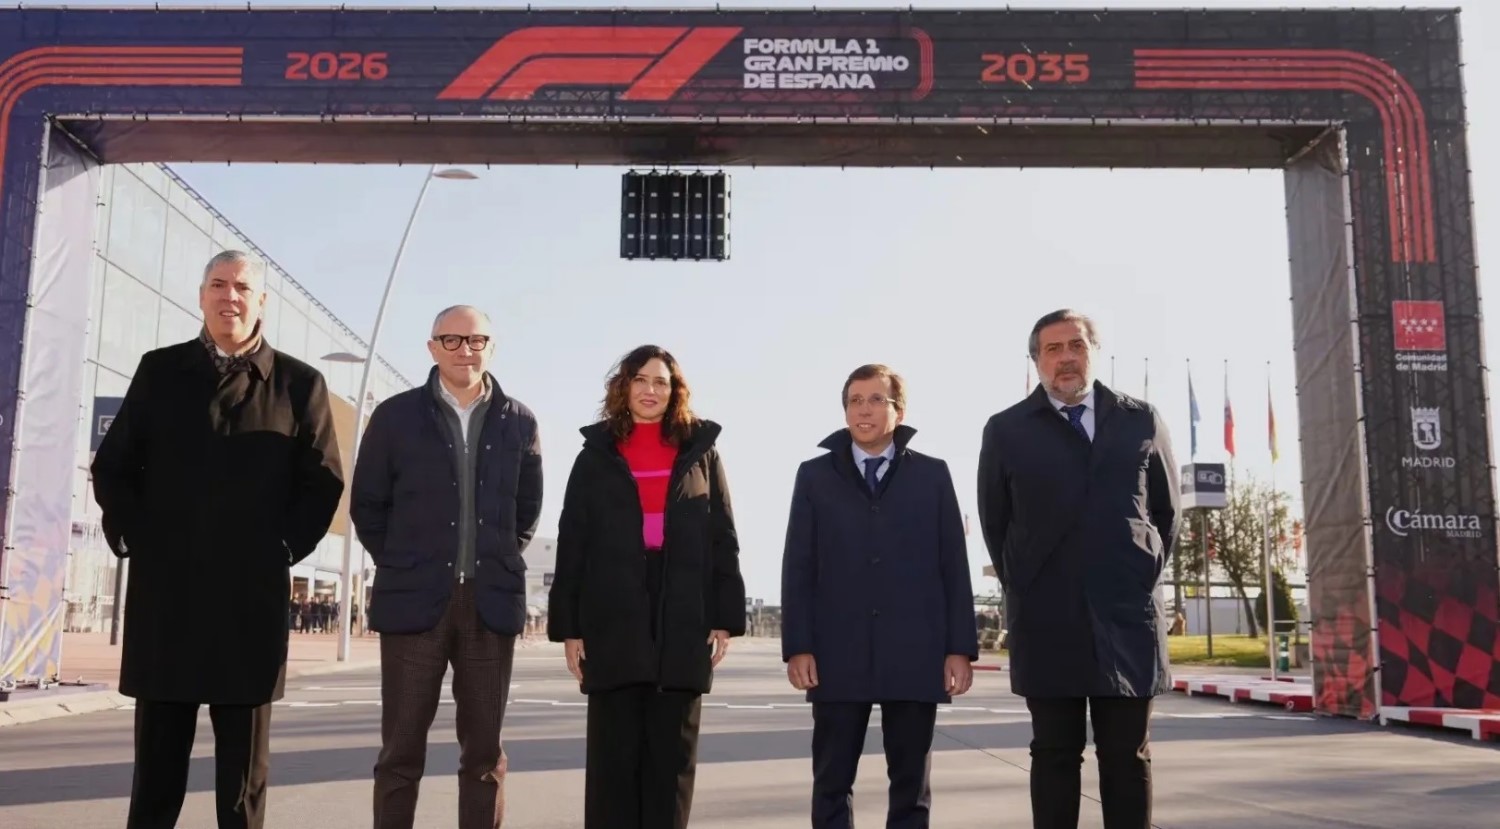 Madrid Spanish GP announcement showing F1 CEO Stefano Domenicali (2nd from left) with the Madrid government and race officials